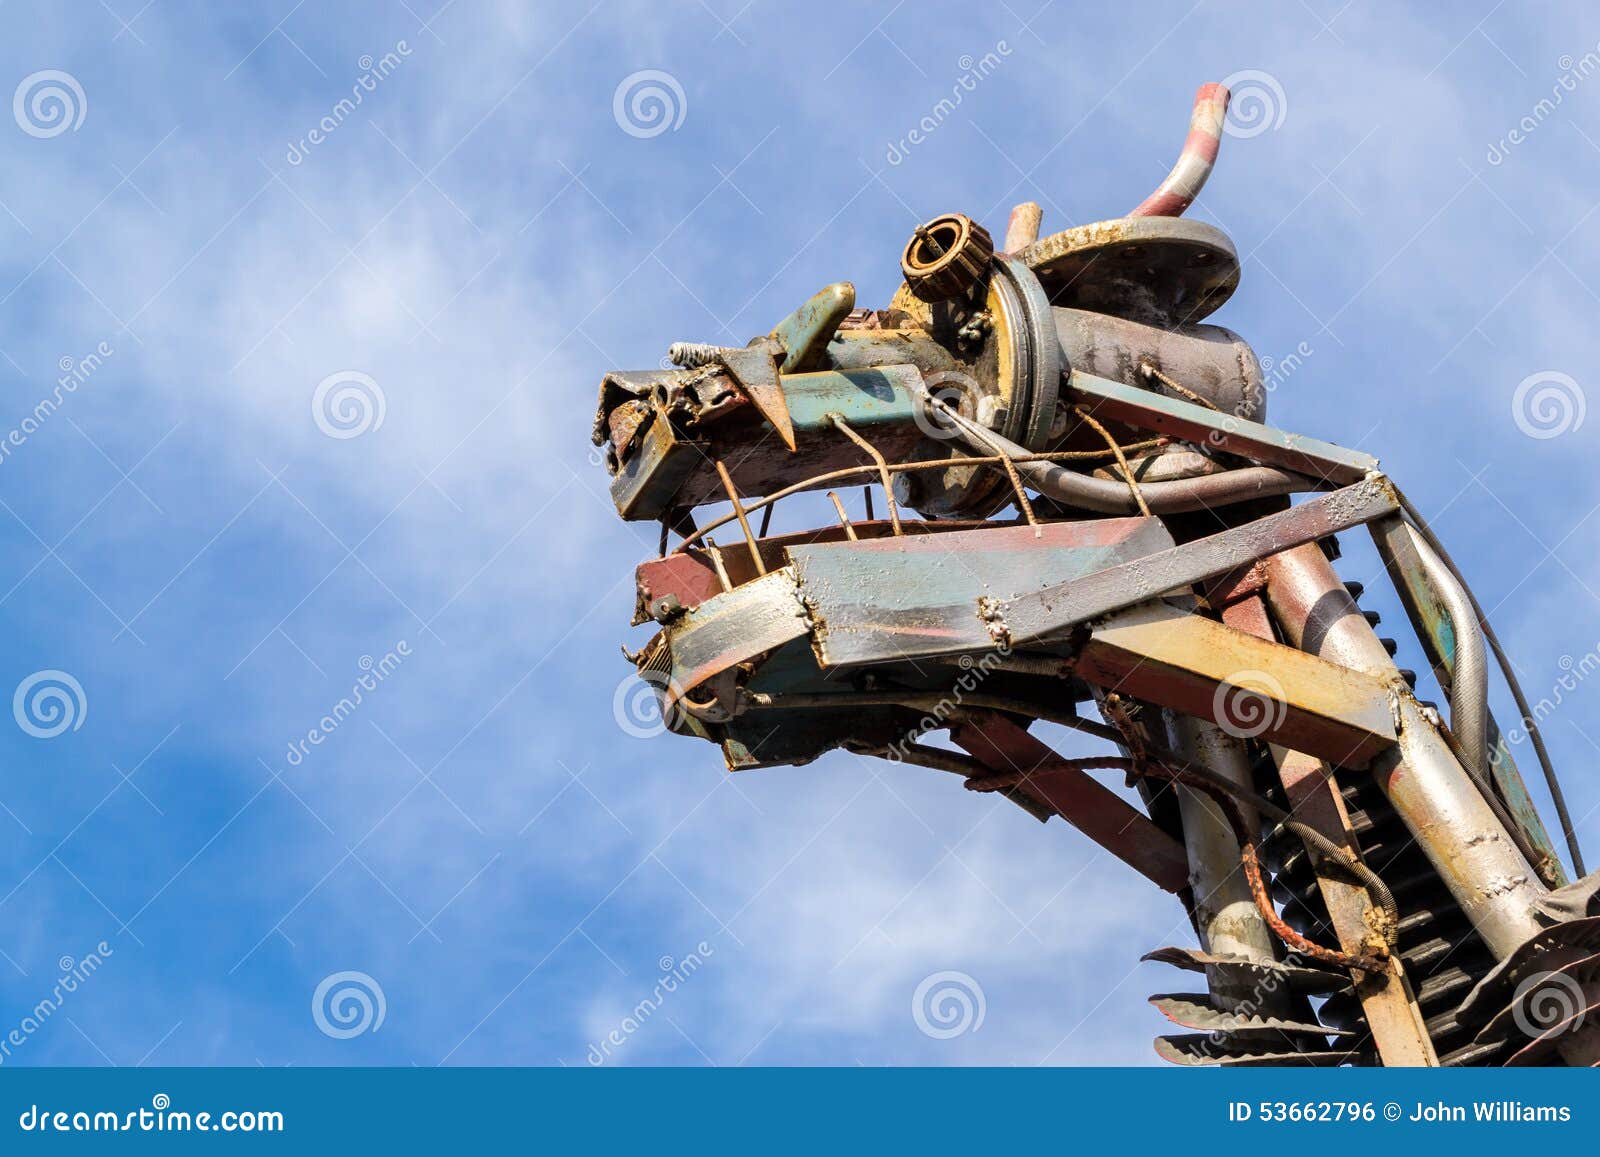 Recycled Metal Scrap Animal Head Stock Photo - Image of junk, cyber:  53662796